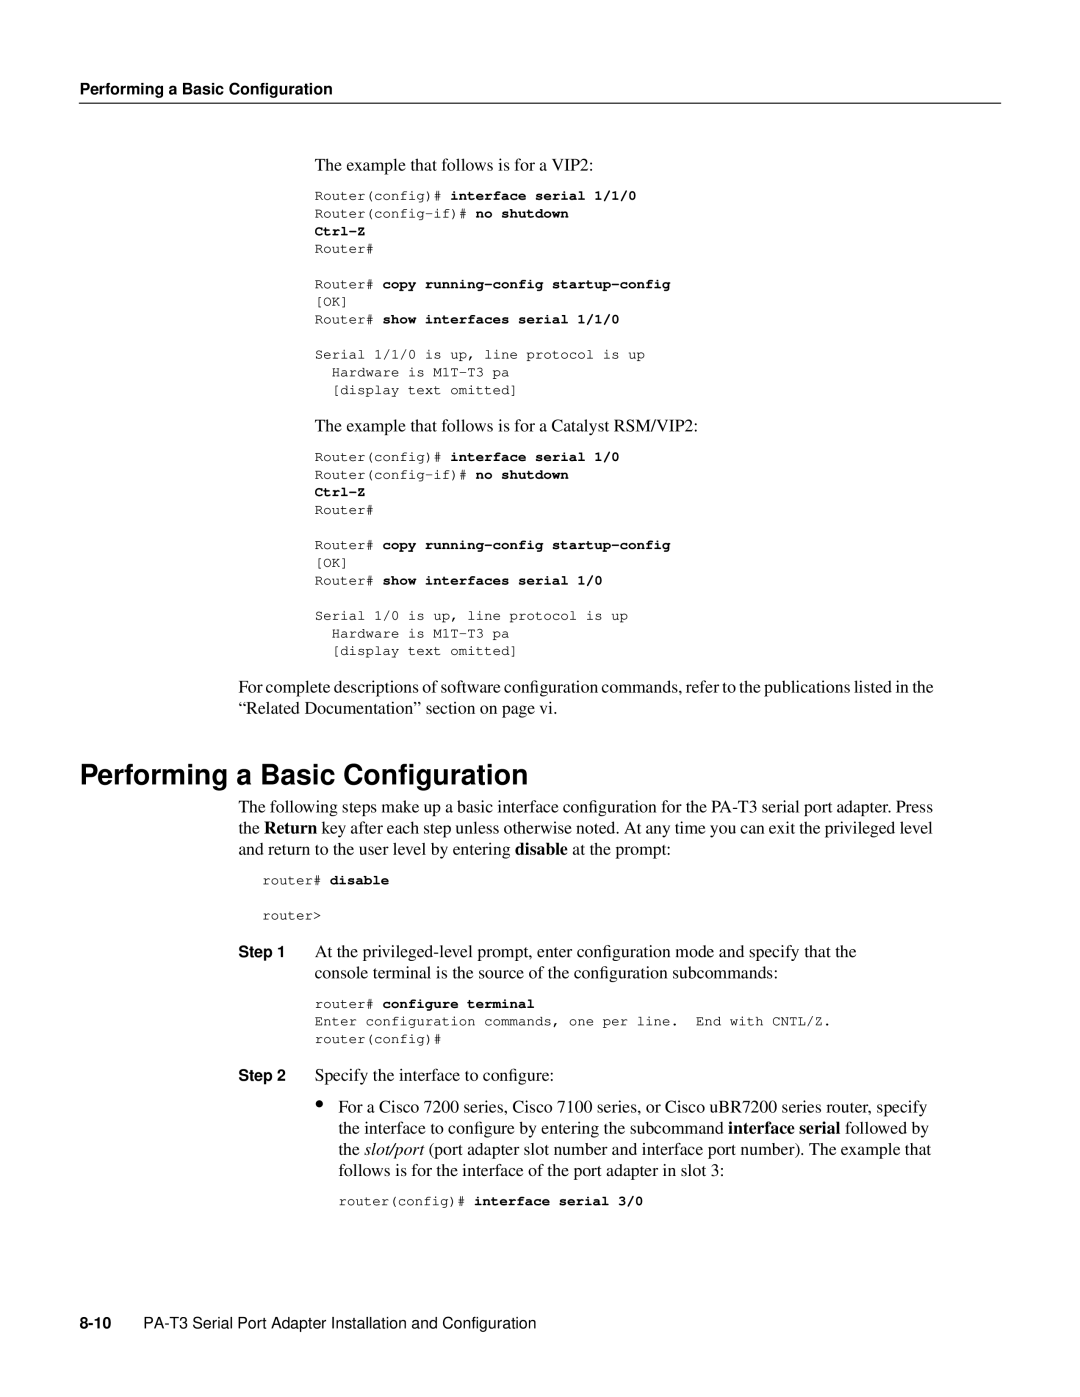 Cisco Systems PA-T3 manual Performing a Basic Conﬁguration, Performing a Basic Configuration 